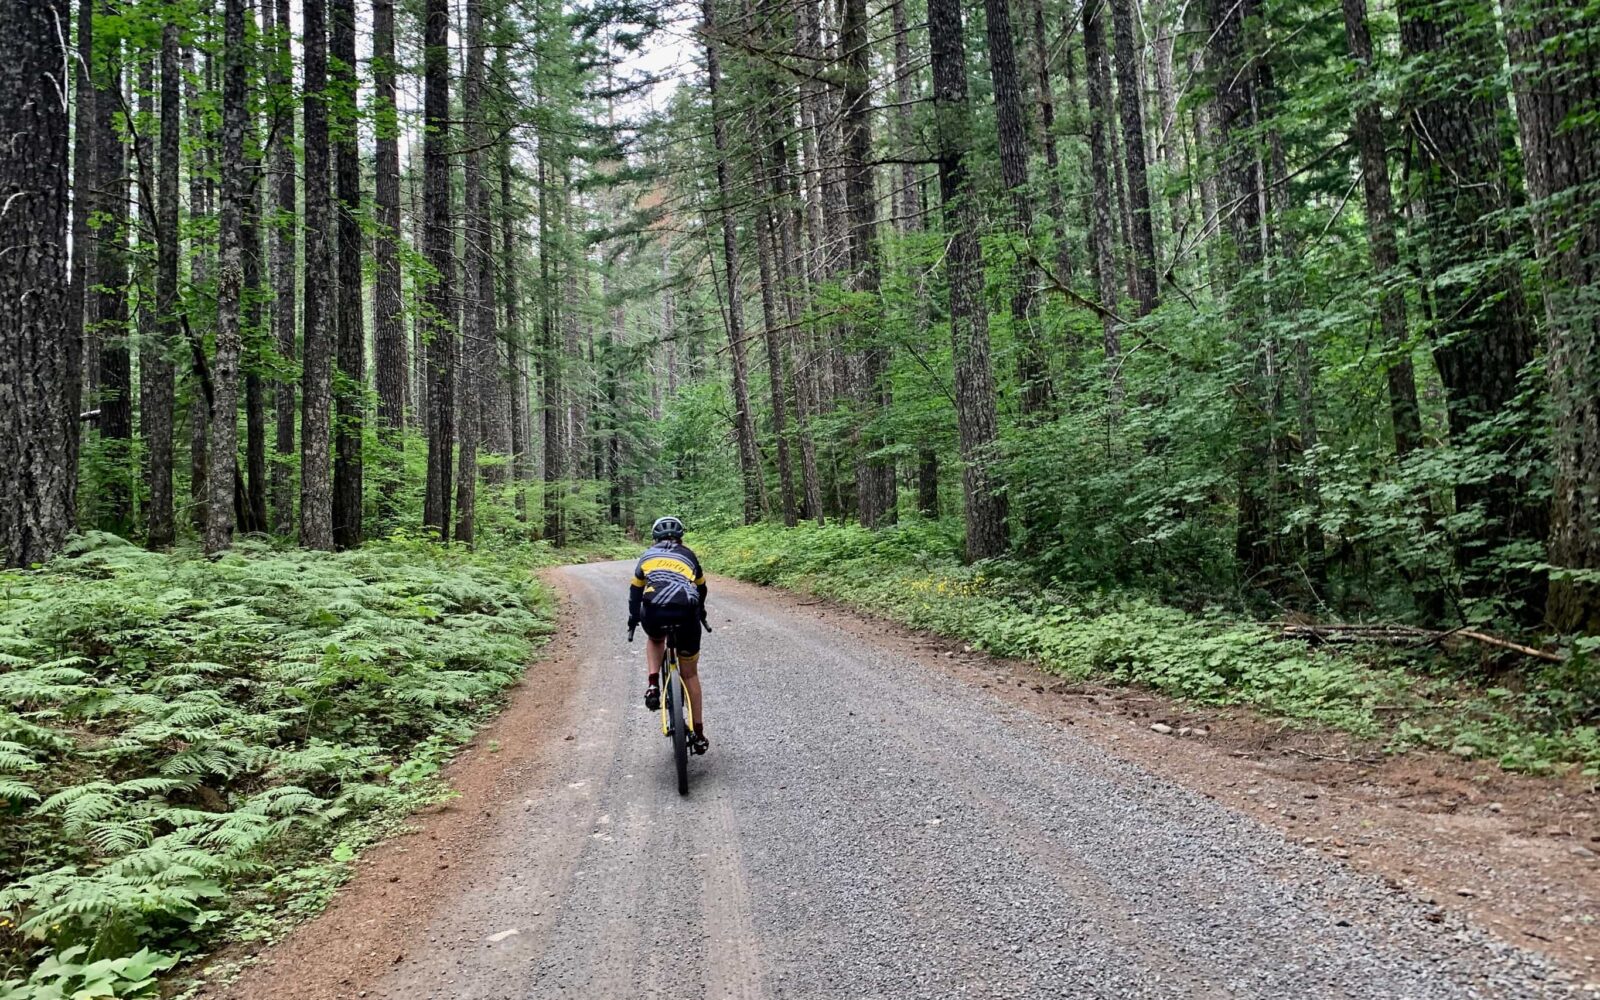 Cyclist on gravel road near Panther Creek in Gifford Pinchot national forest in the Columbia River Gorge area.